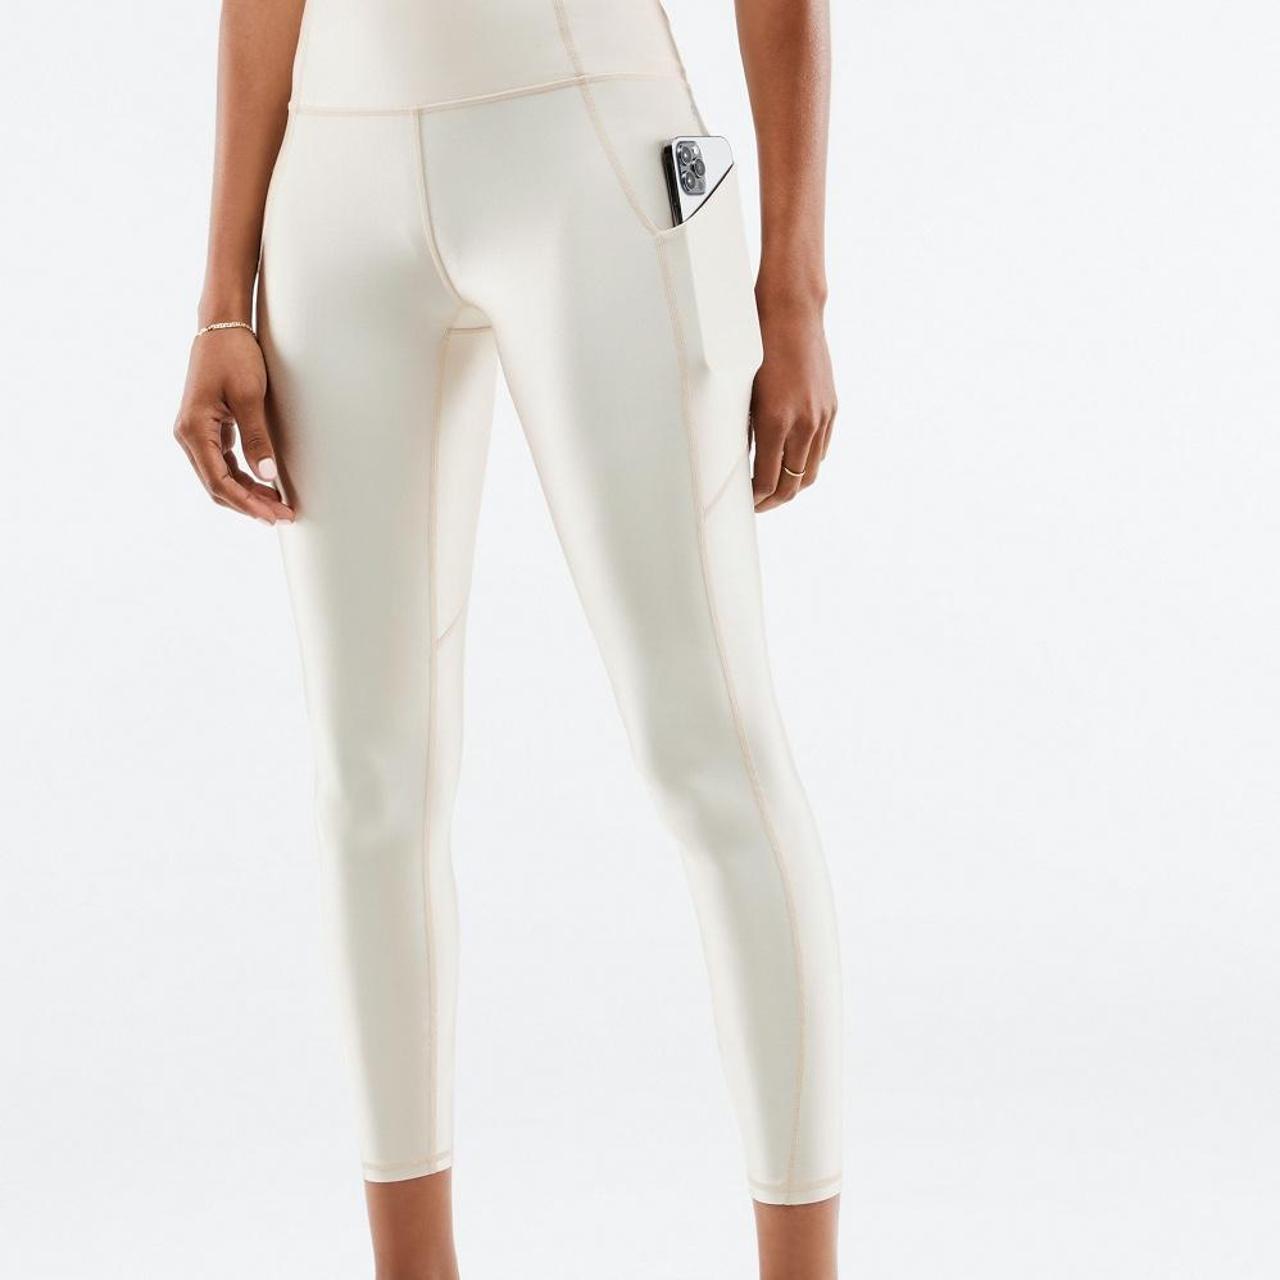 Fabletics Oasis PureLuxe Shine High Waisted Pocket